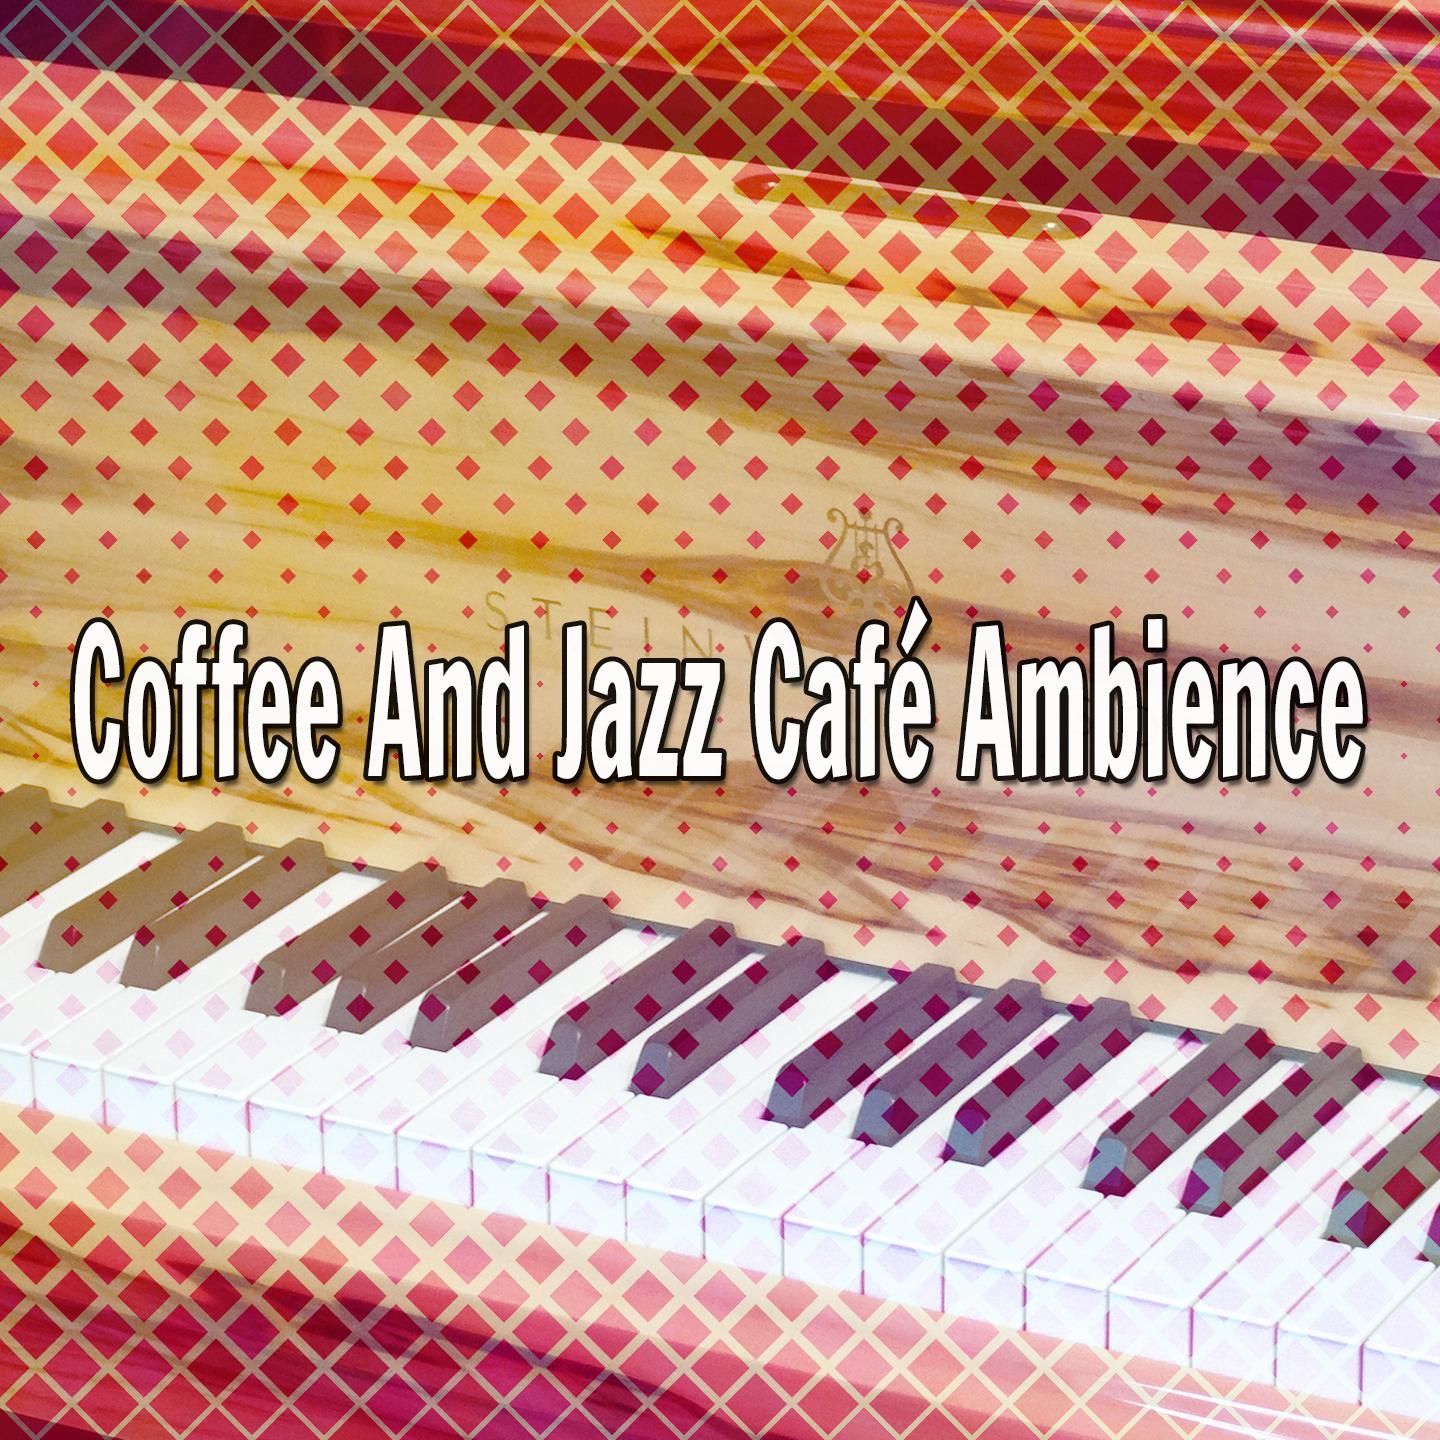 Coffee And Jazz Café Ambience